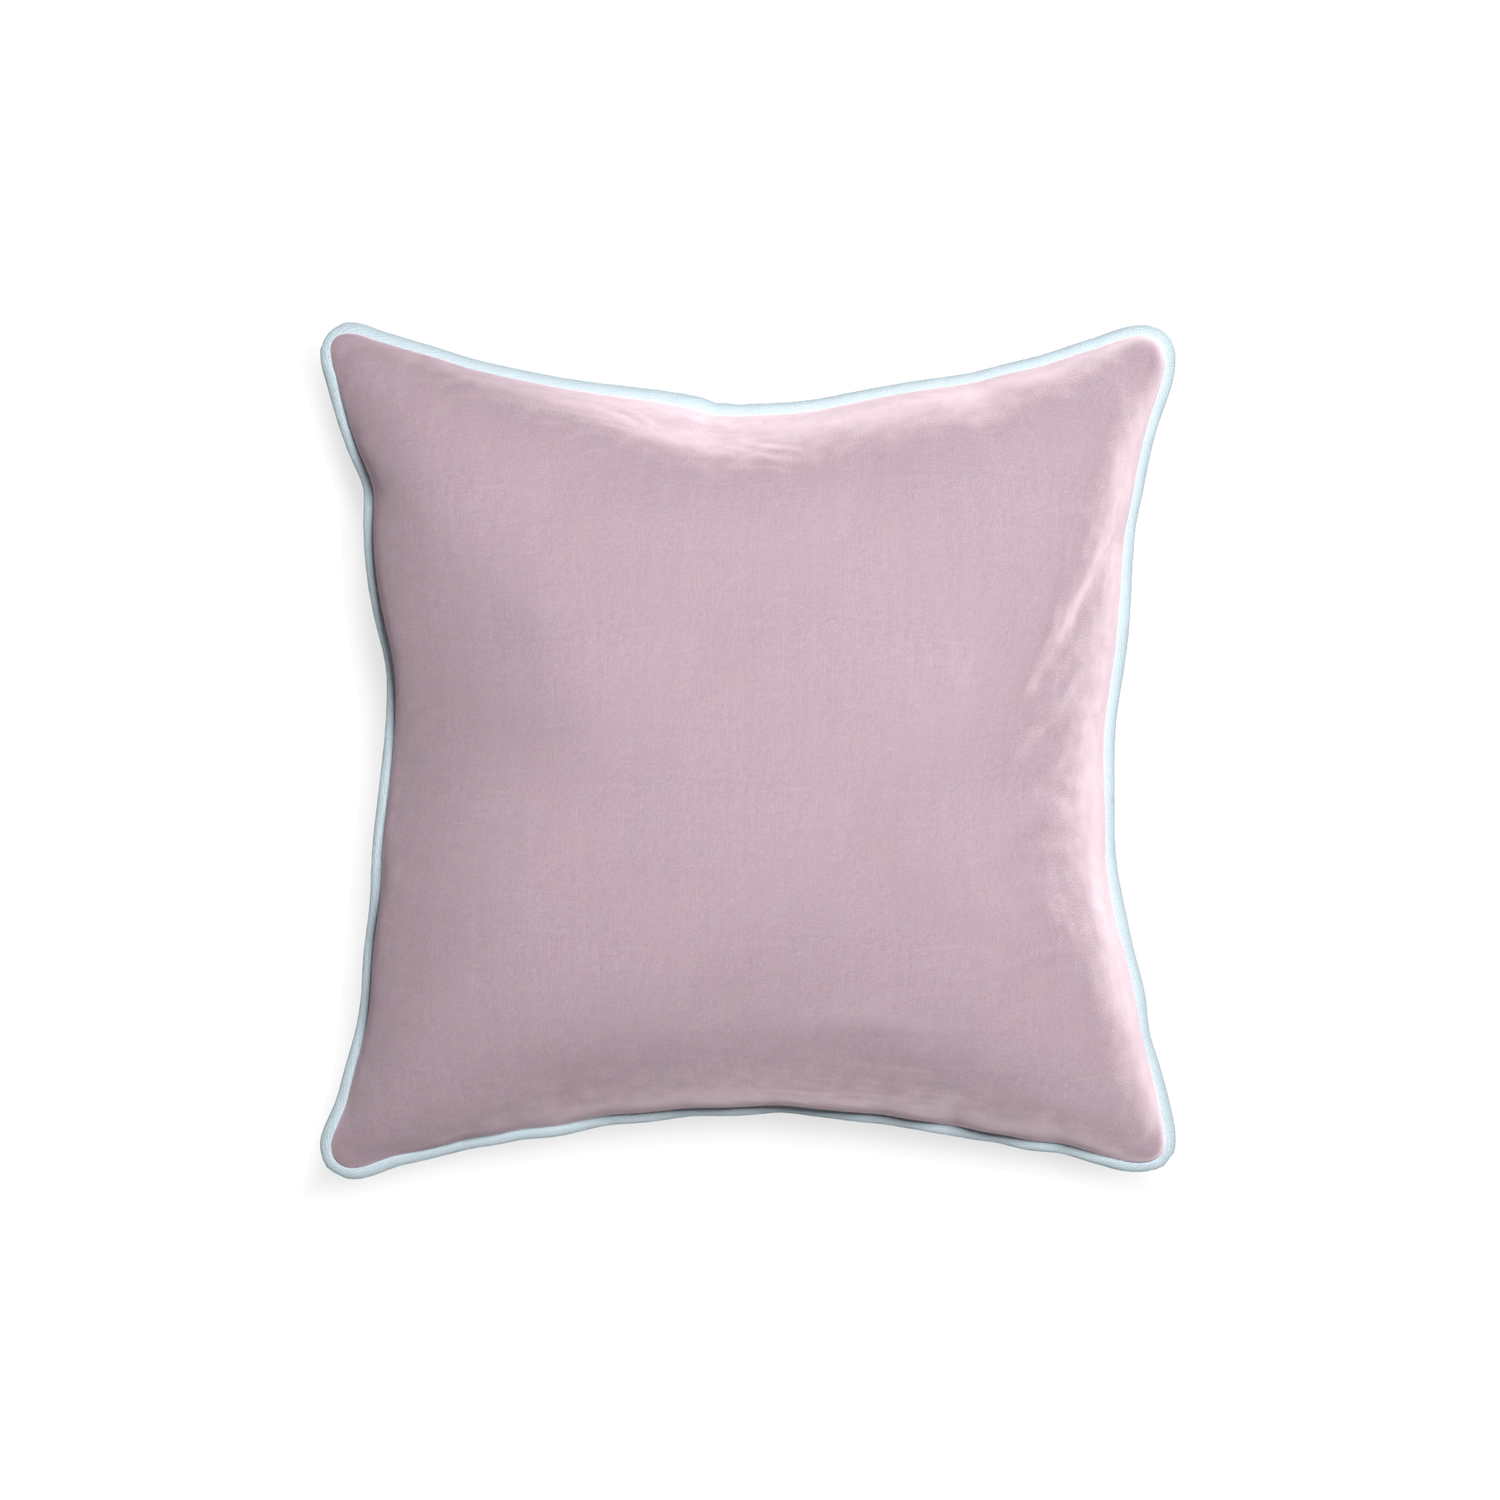 18-square lilac velvet custom pillow with powder piping on white background